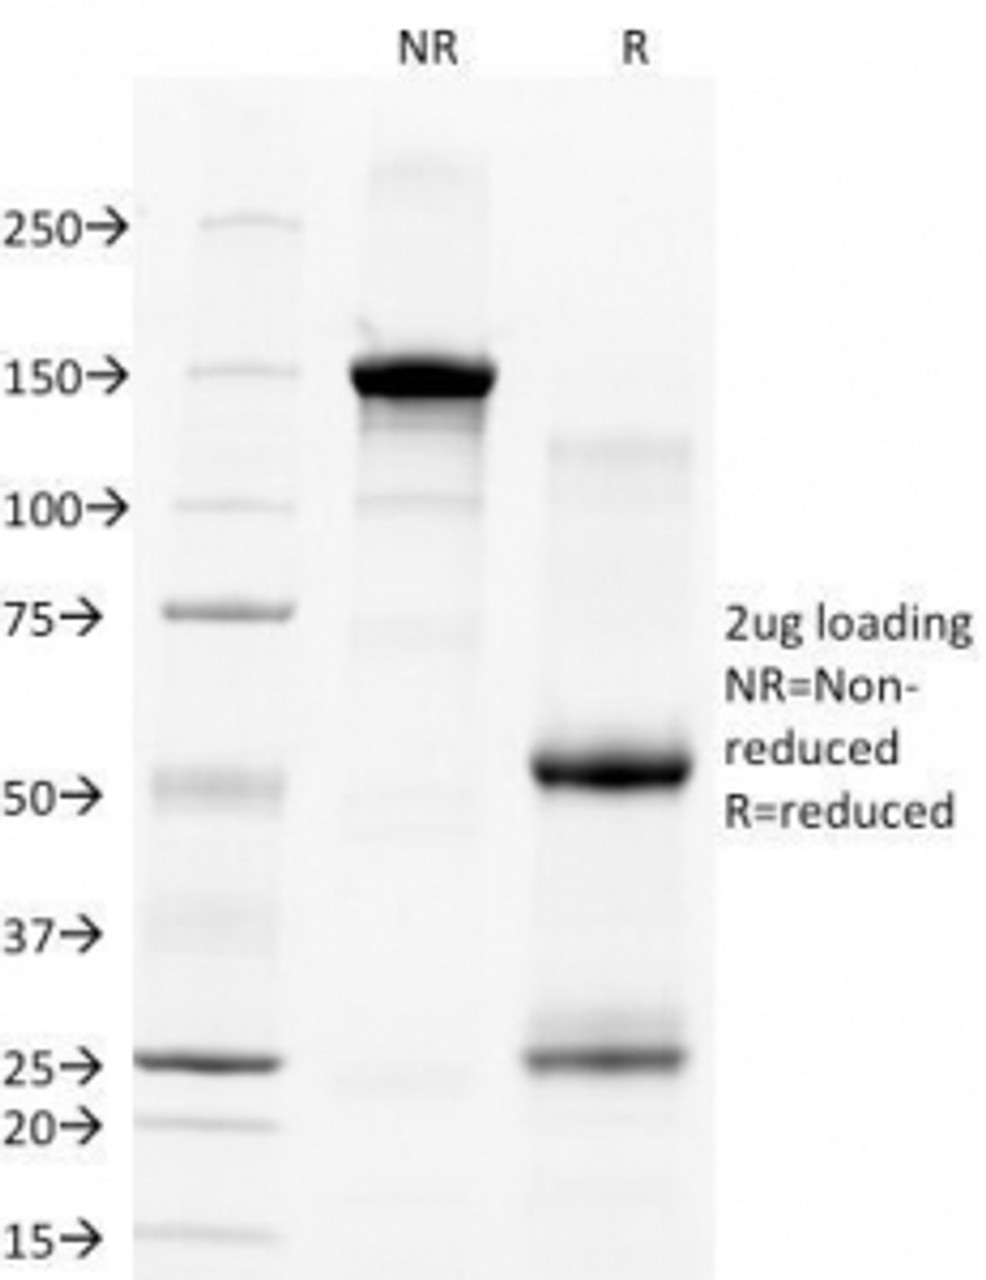 SDS-PAGE Analysis of Purified, BSA-Free CD28 Antibody (clone C28/77) . Confirmation of Integrity and Purity of the Antibody.